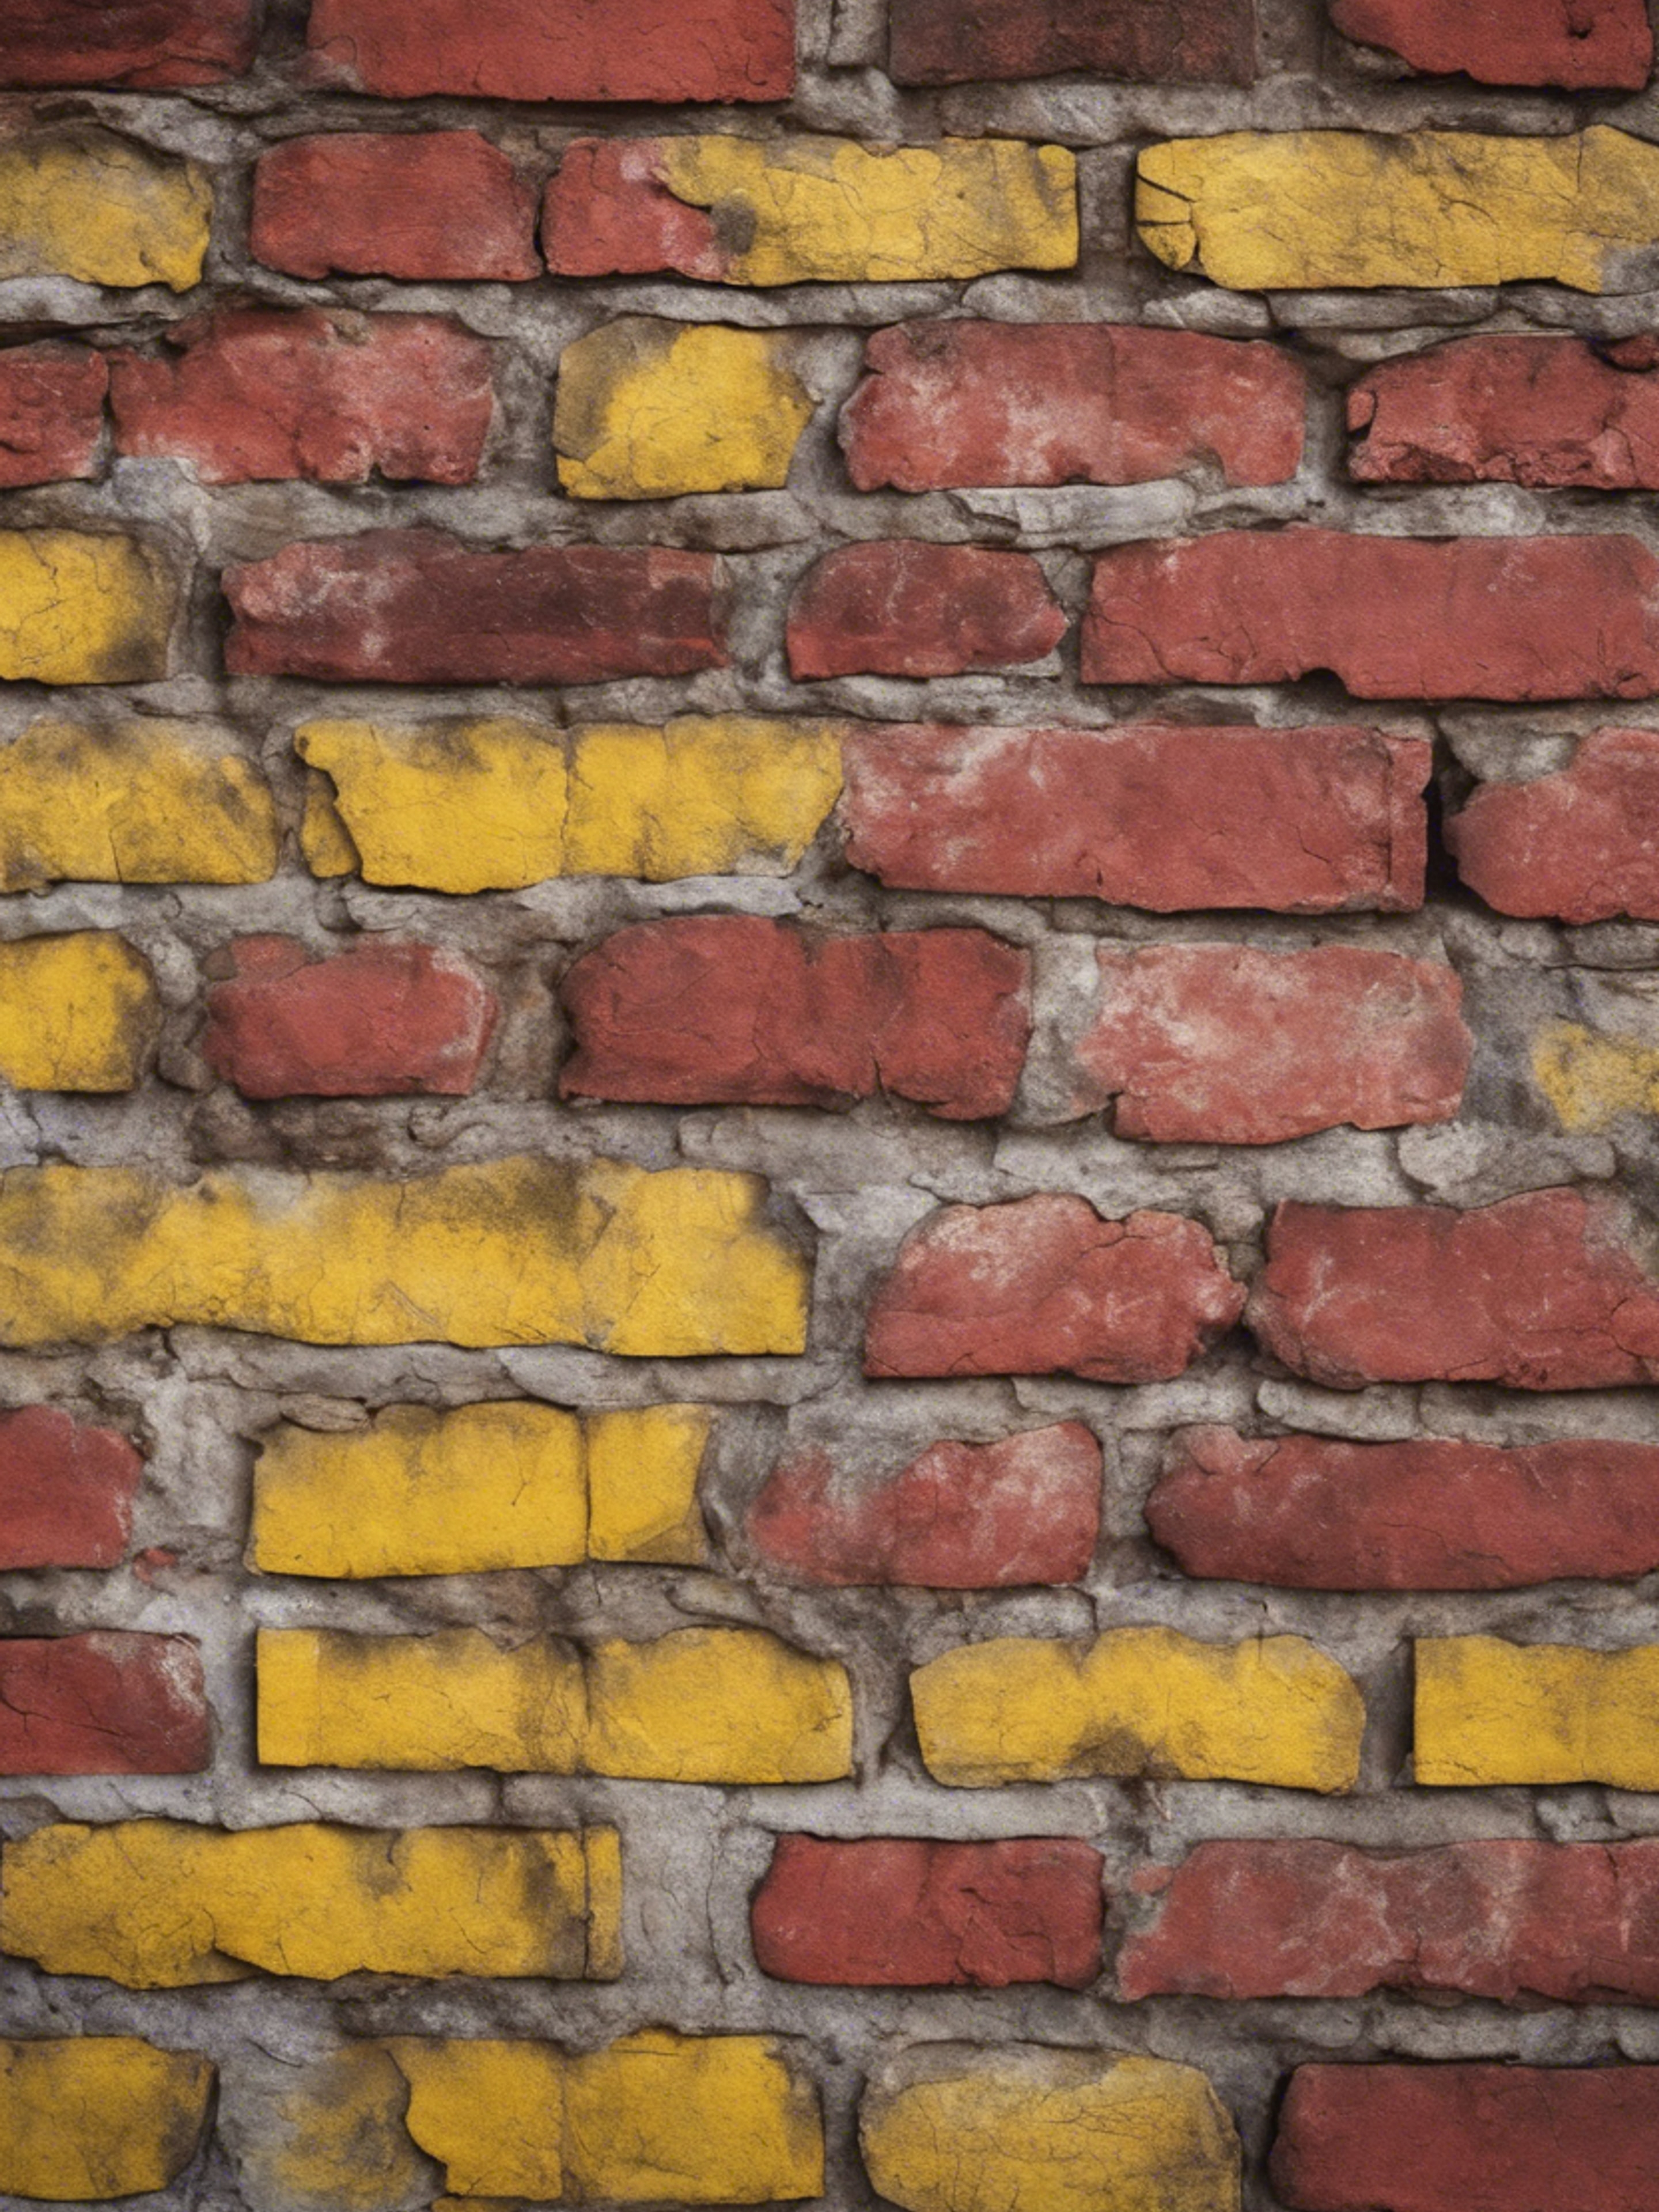 A weathered wall showing an aged interpretation of red and yellow brick pattern.壁紙[9de1dc722d5f4301b6ed]